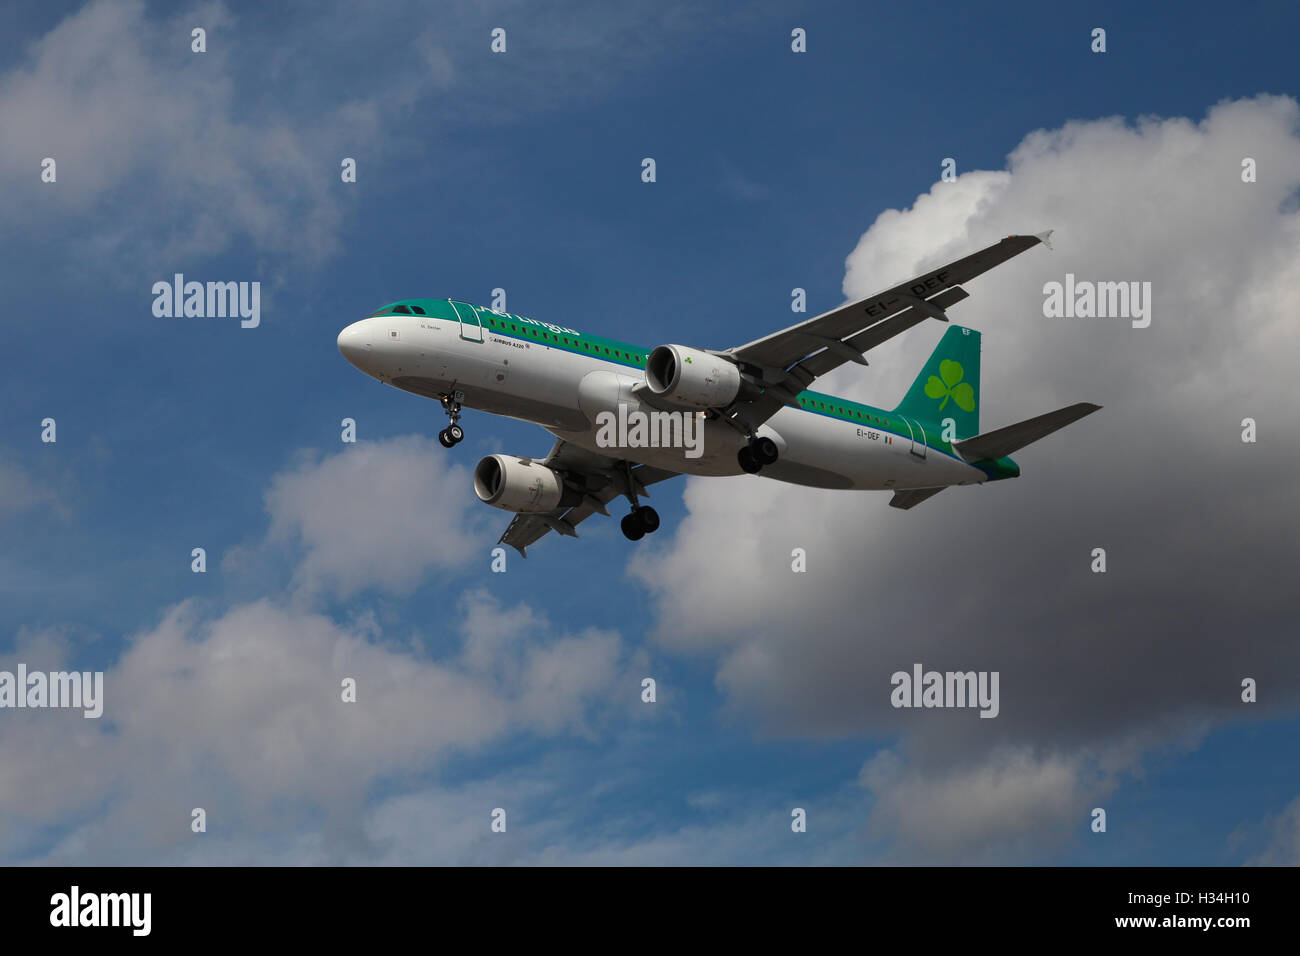 Aer Lingus Airbus A320-214 approaching London Heathrow airport. Stock Photo